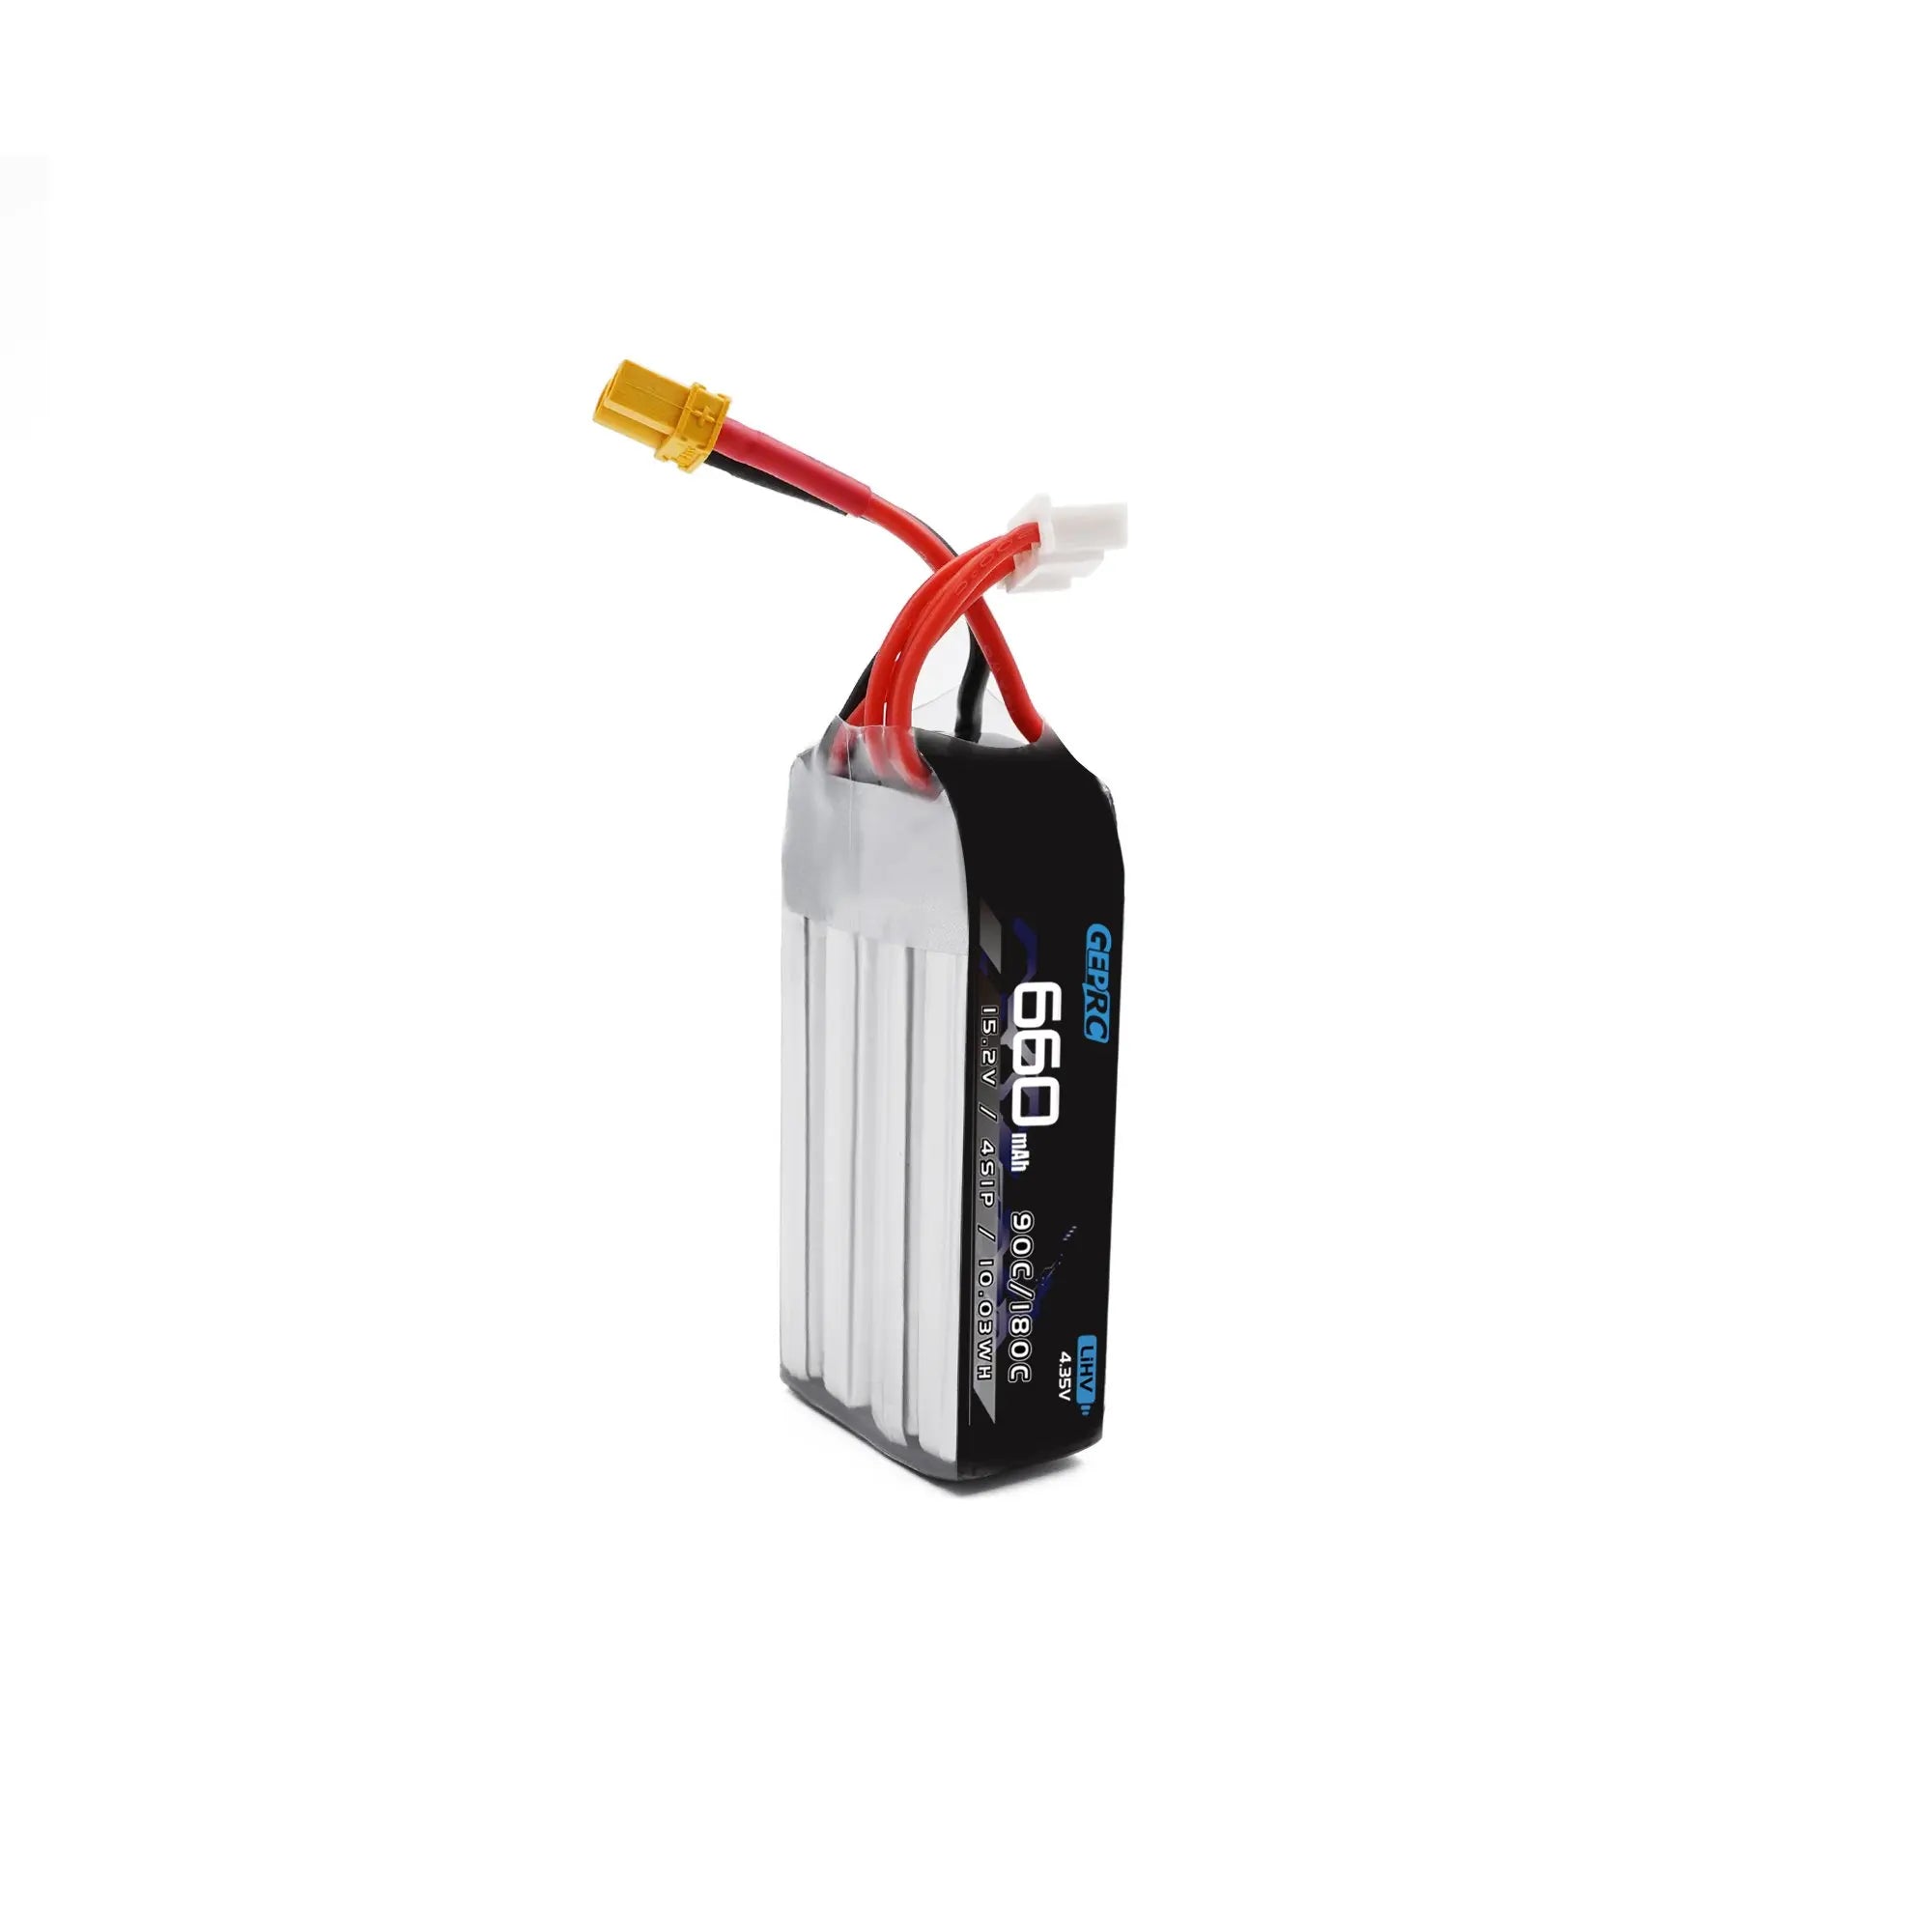 GEPRC 4S 660mAh LiPo Battery, the full charge voltage of single cell of LiPo battery is not more than 4.2V